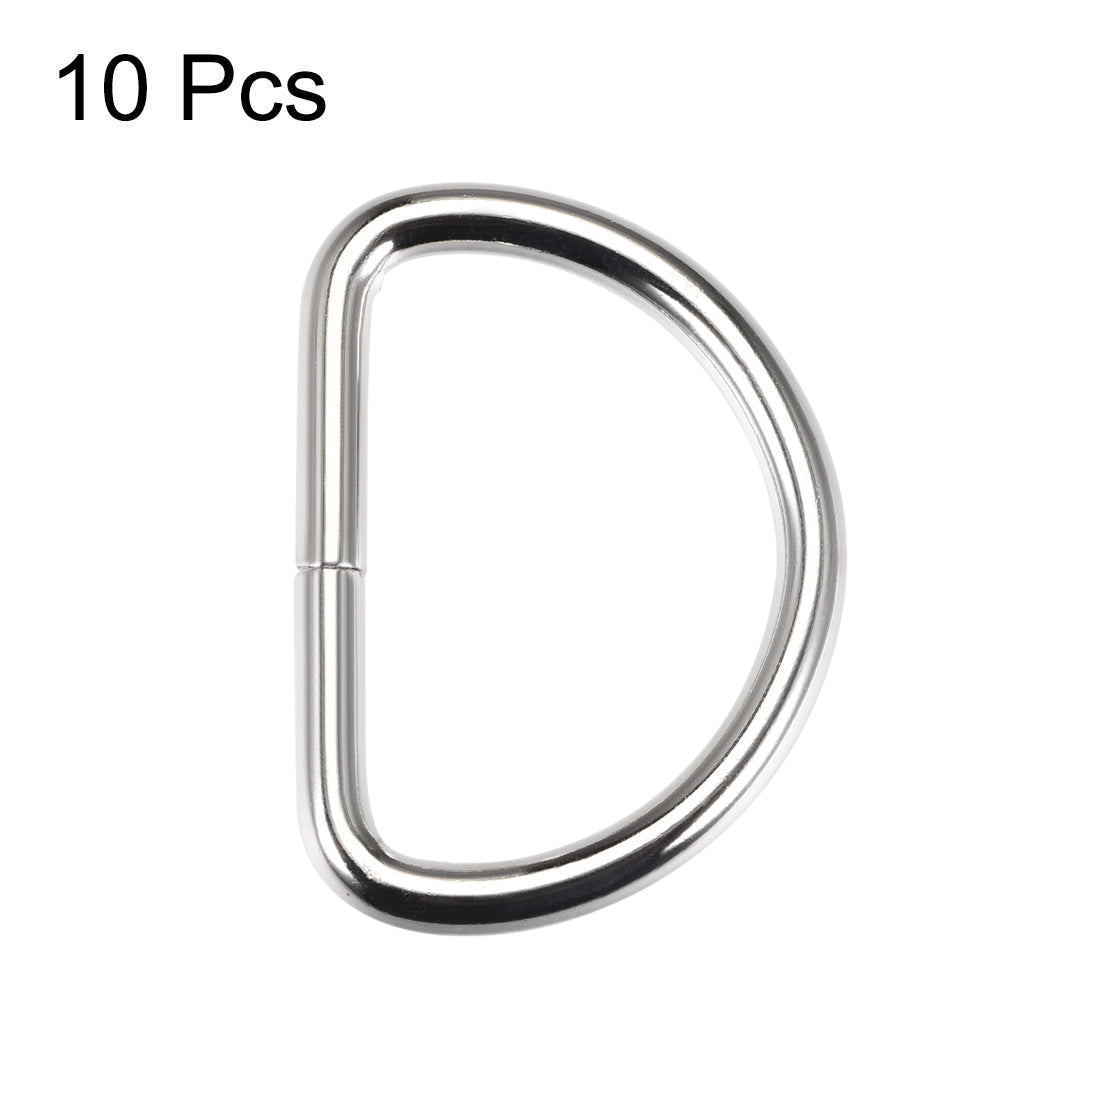 uxcell Uxcell 10 Pcs D Ring Buckle 1.6 Inch Metal Semi-Circular D-Rings Silver Tone for Hardware Bags Belts Craft DIY Accessories